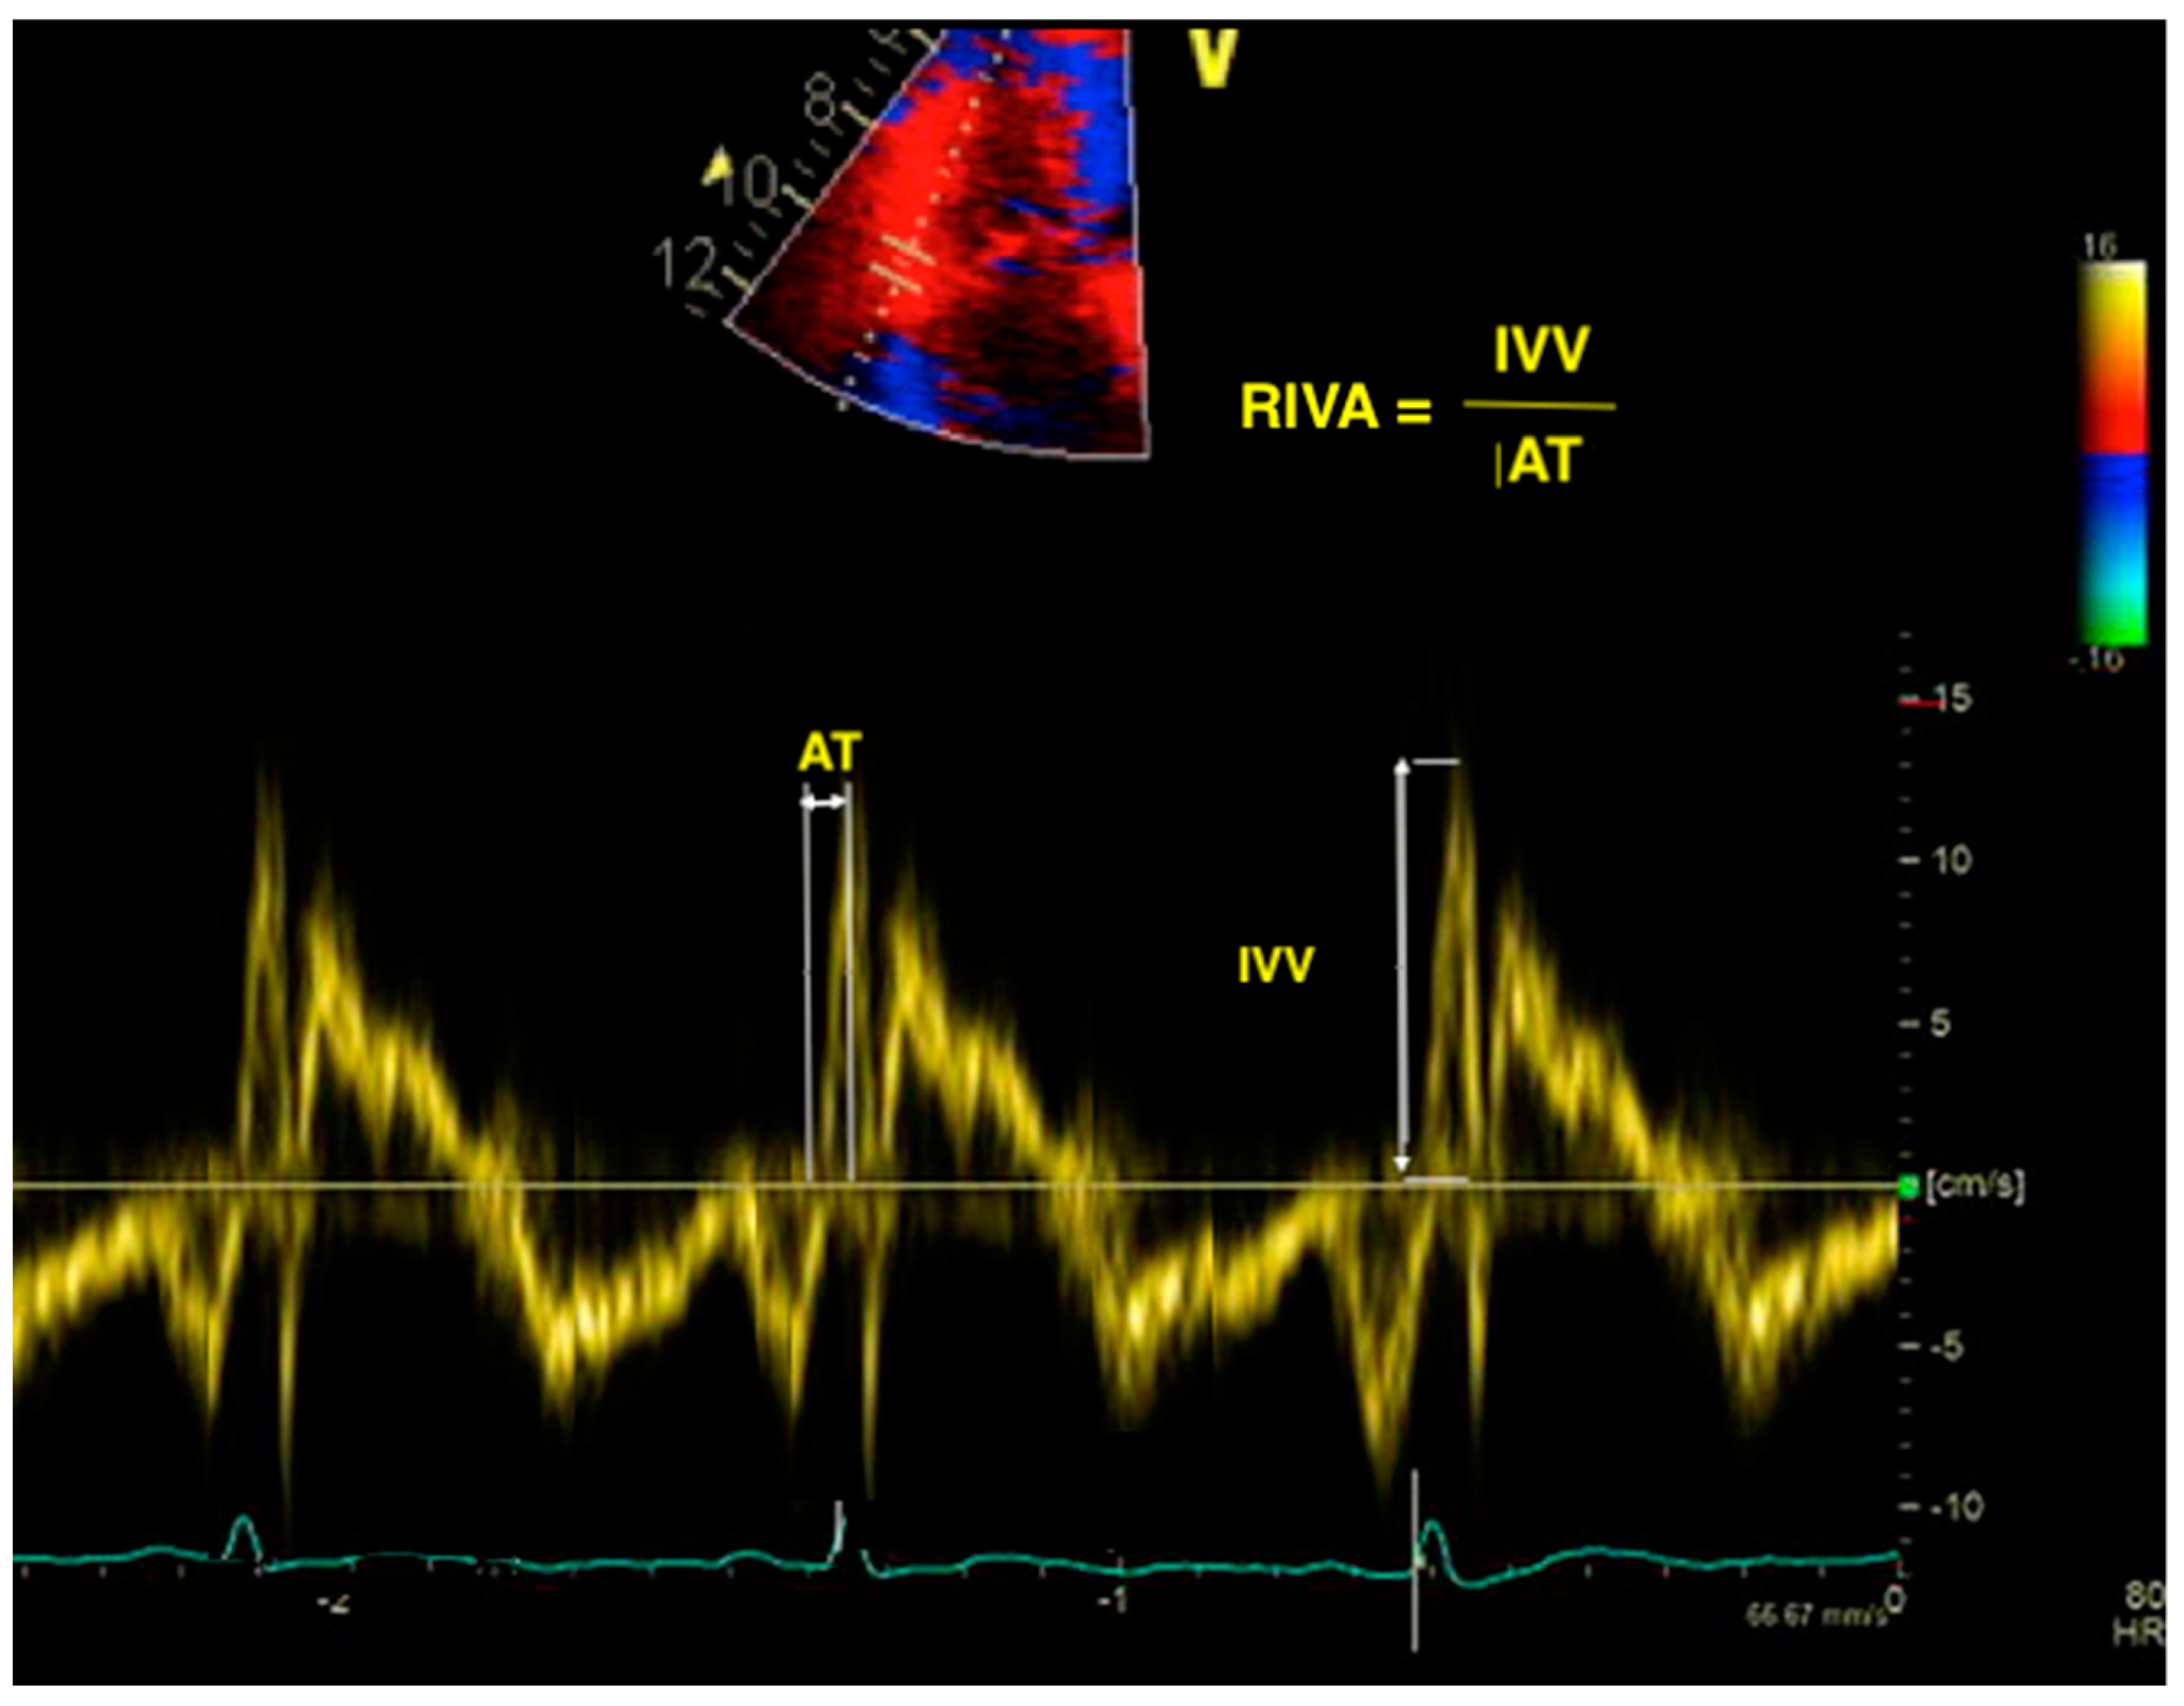 Diagnostics | Free Forgotten No More—The Role of Right Ventricular Dysfunction in Heart Failure with Reduced Ejection Fraction: An Echocardiographic Perspective